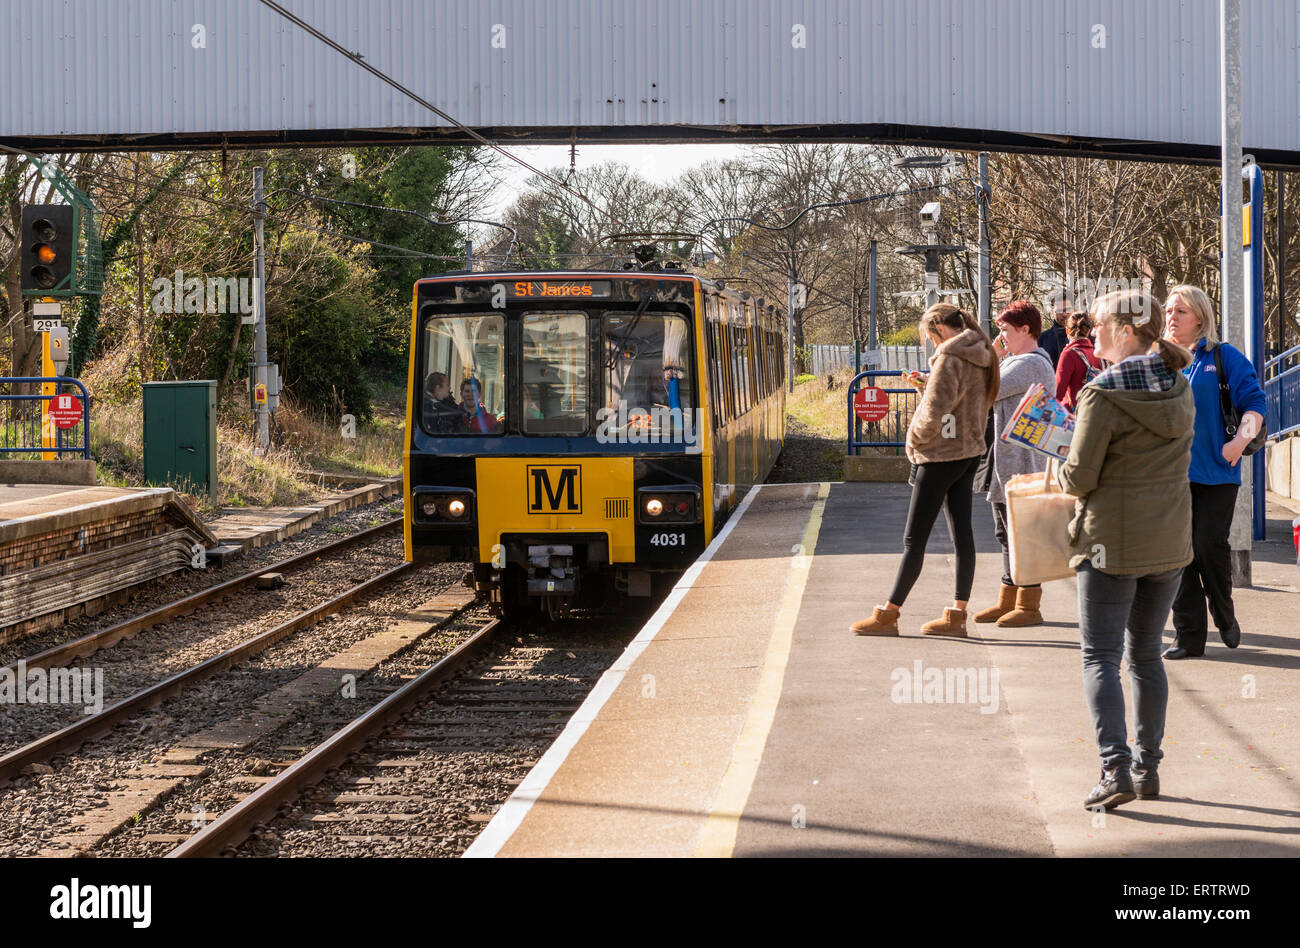 Newcastle Metro train arriving at a station, Newcastle Upon Tyne, North East England, UK Stock Photo